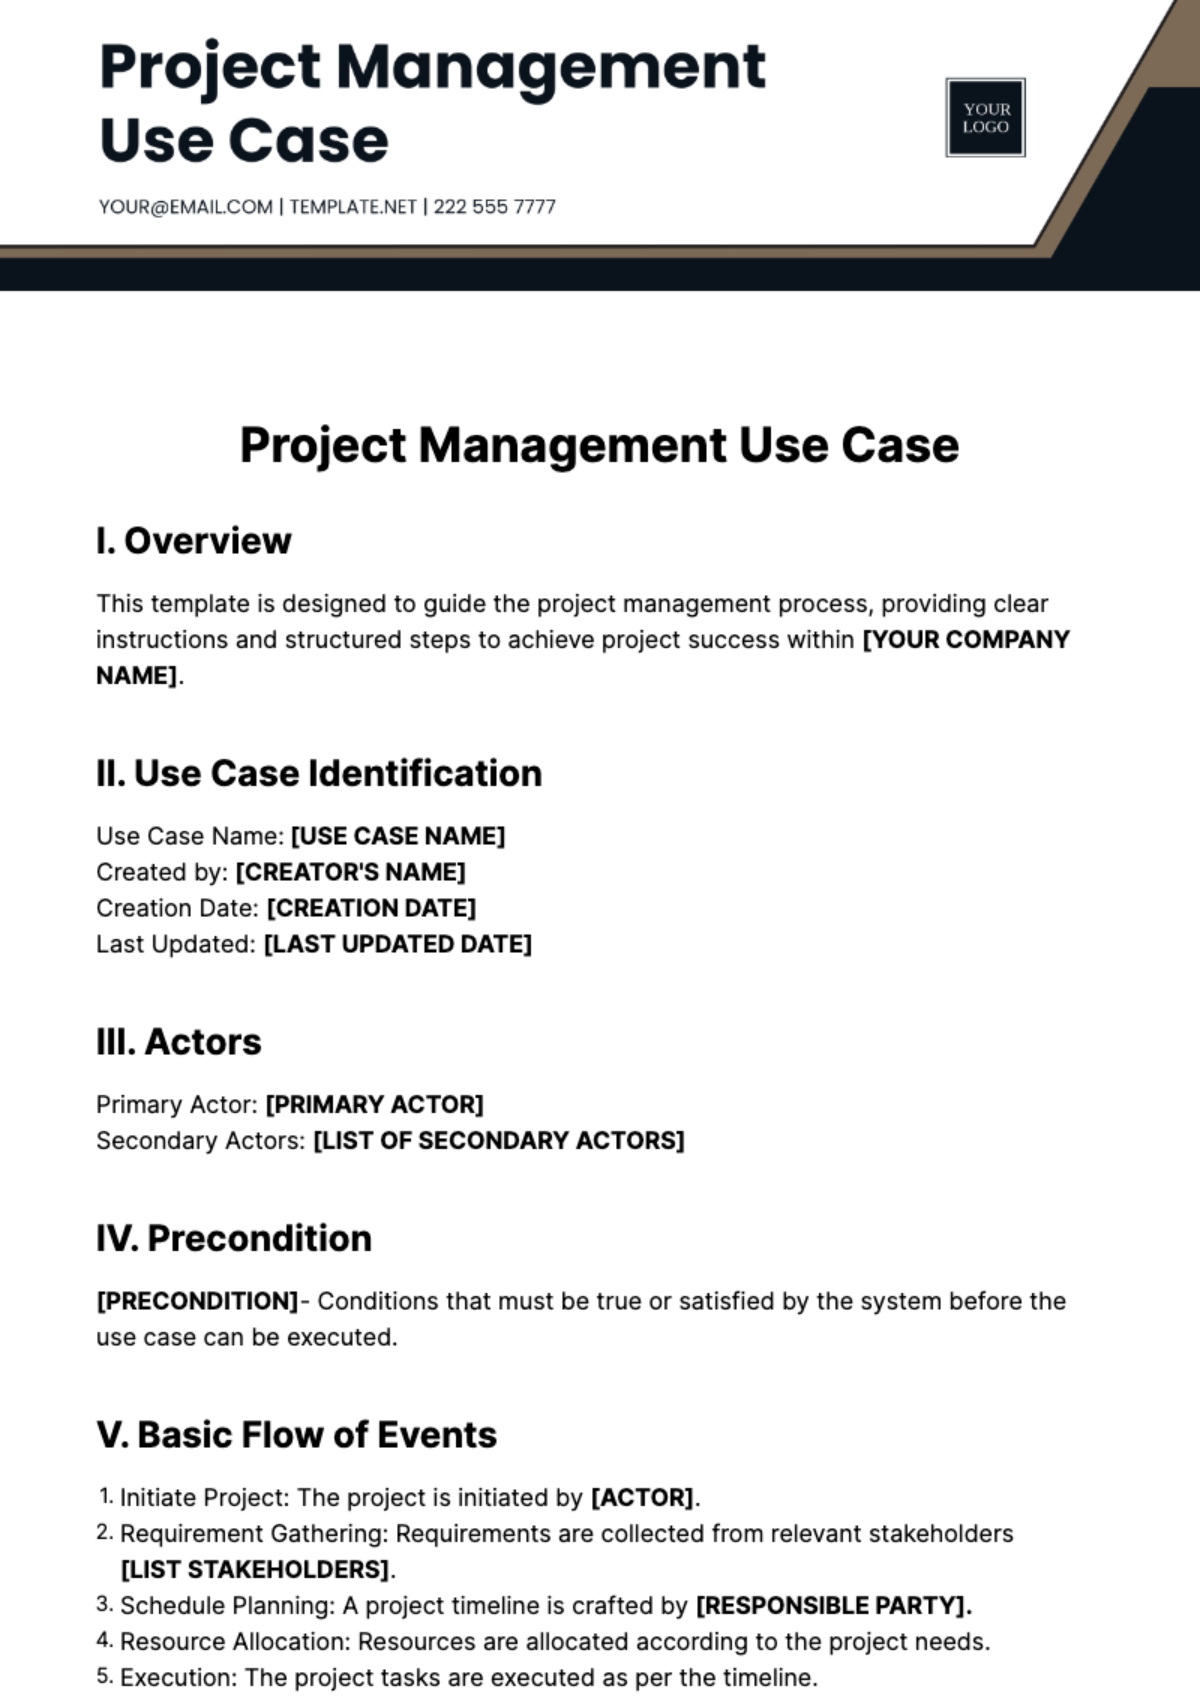 Project Management Use Case Template